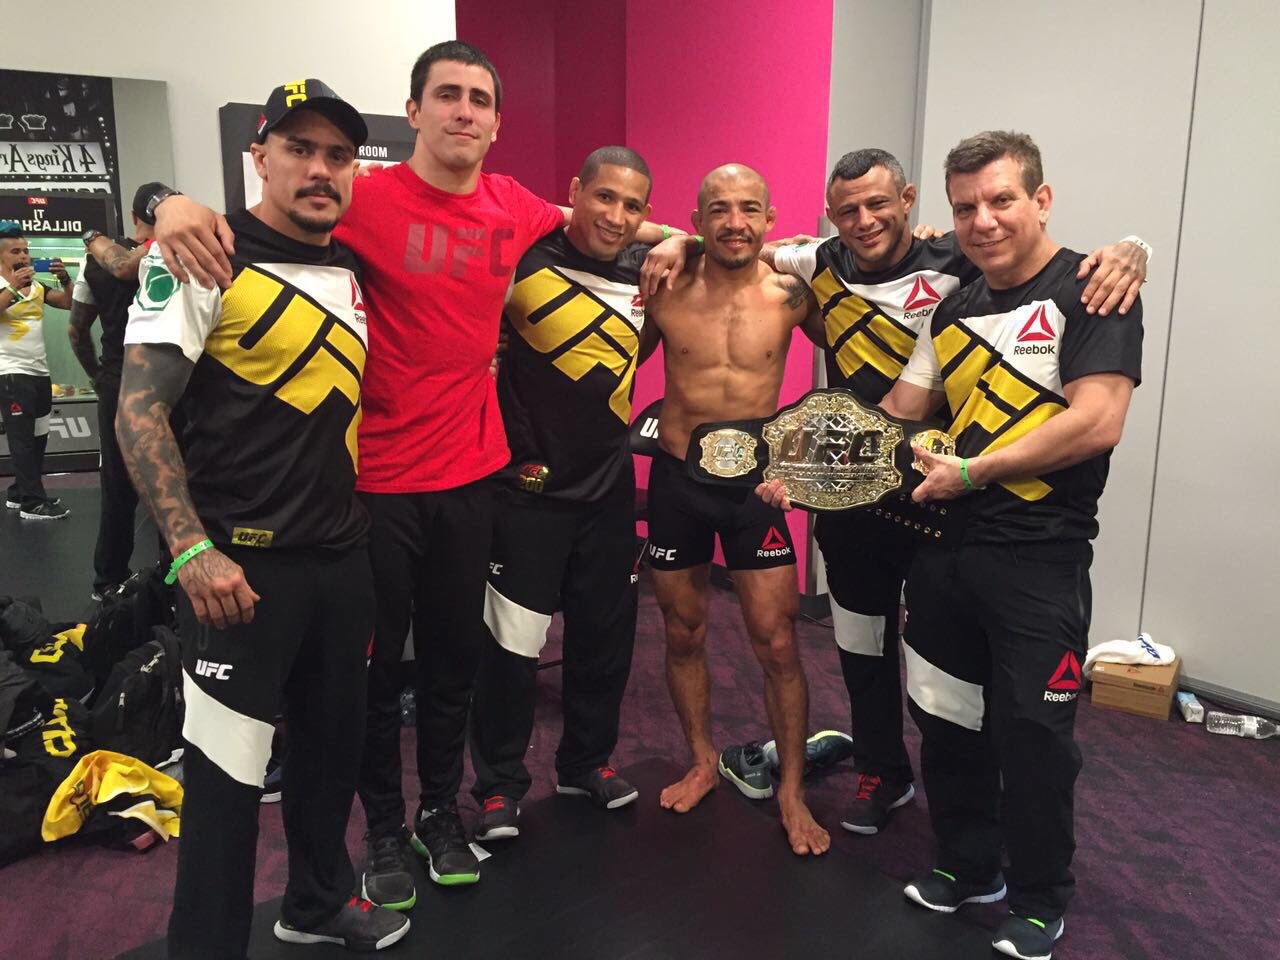 Konsekvenser Kinematik skak Jose Aldo Junior on Twitter: "I told you, Brazil. This belt is coming home.  Focused on the linear now. See you in NY, @TheNotoriousMMA? #ufc200  https://t.co/3qJVEc2lee" / Twitter